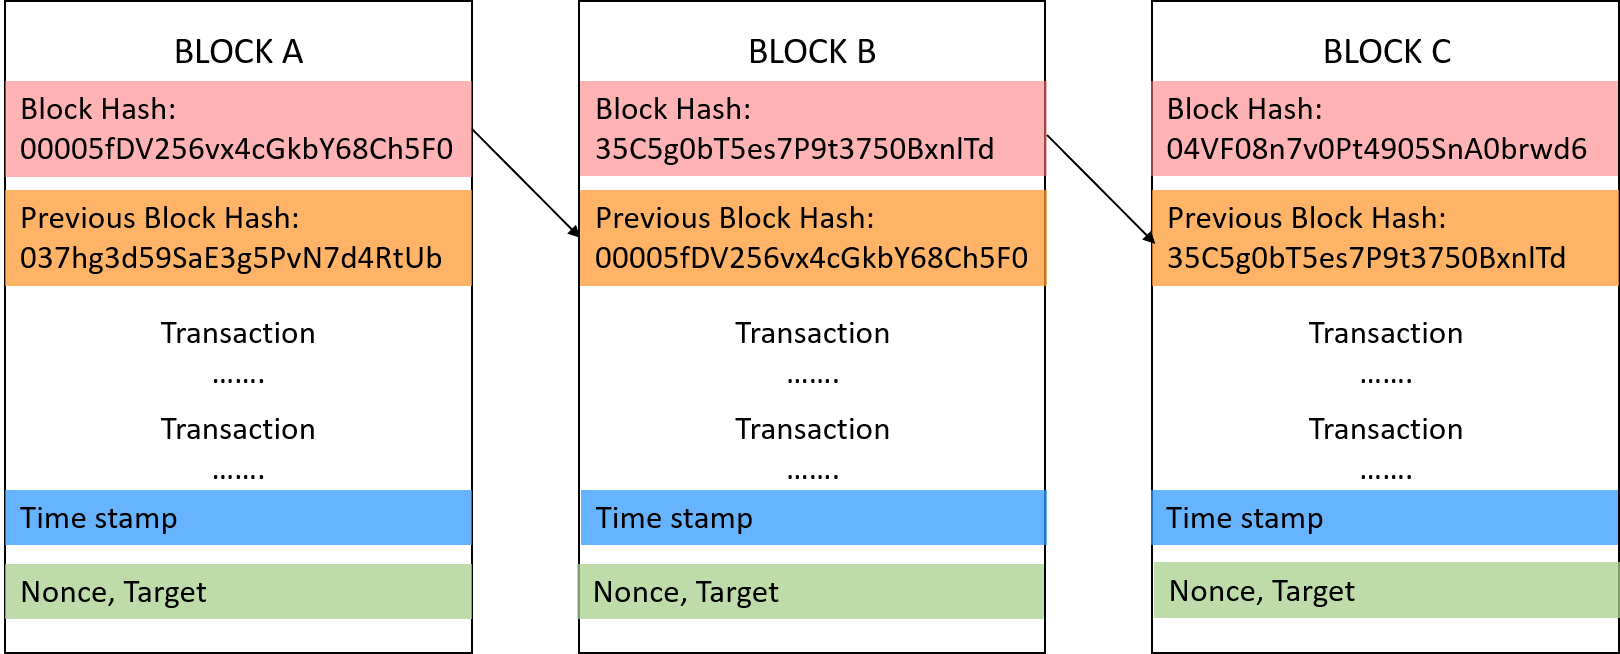 Components of a Block in Blockchain